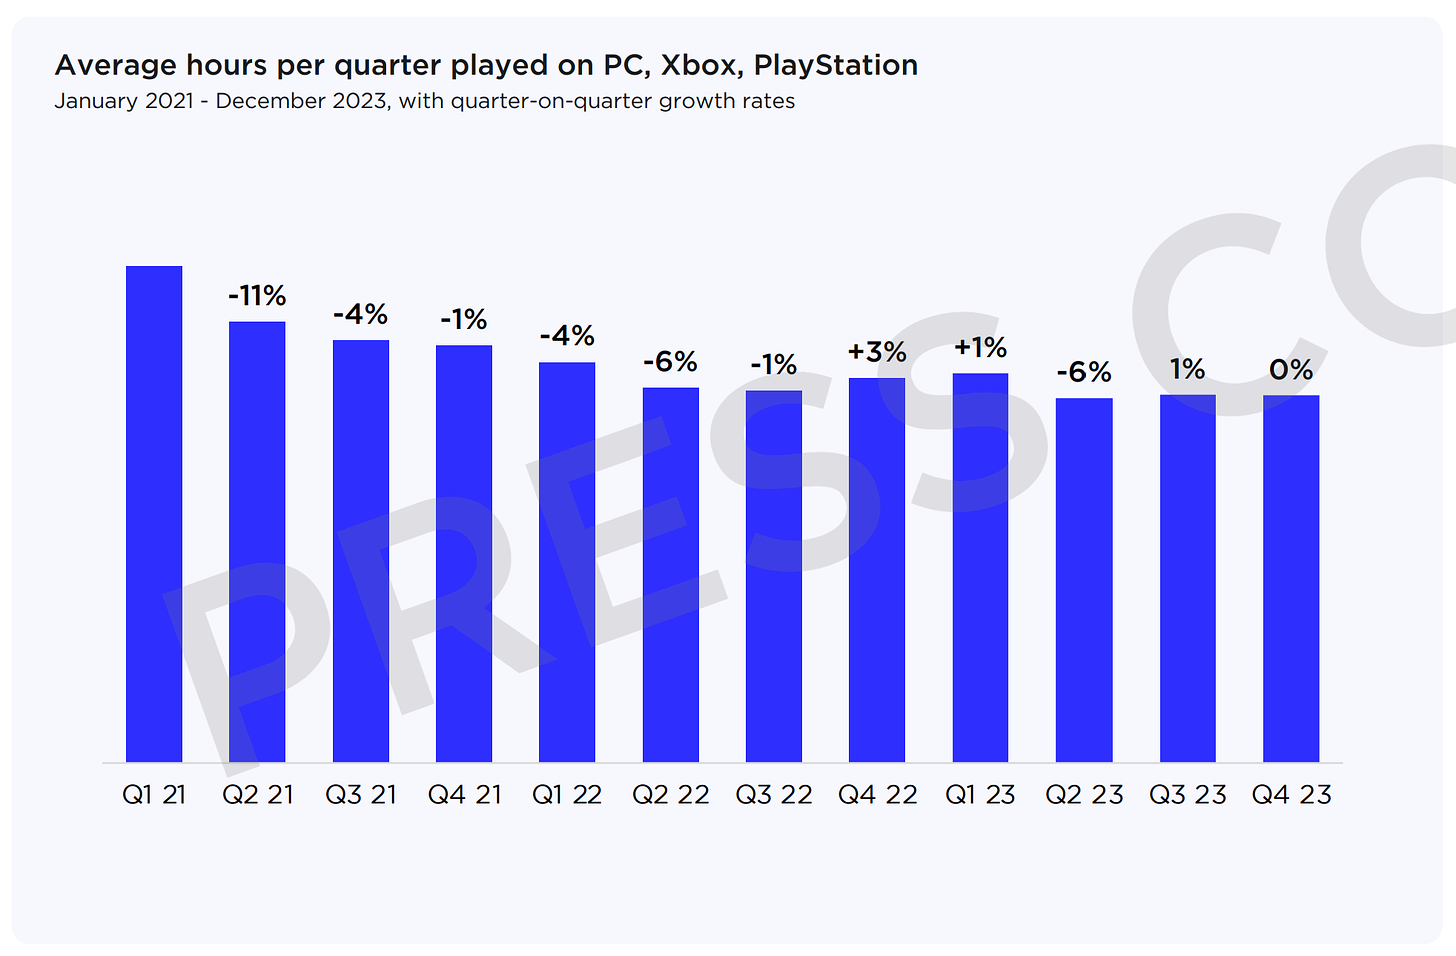 avg hours per quarter played on PC, Xbox, PS